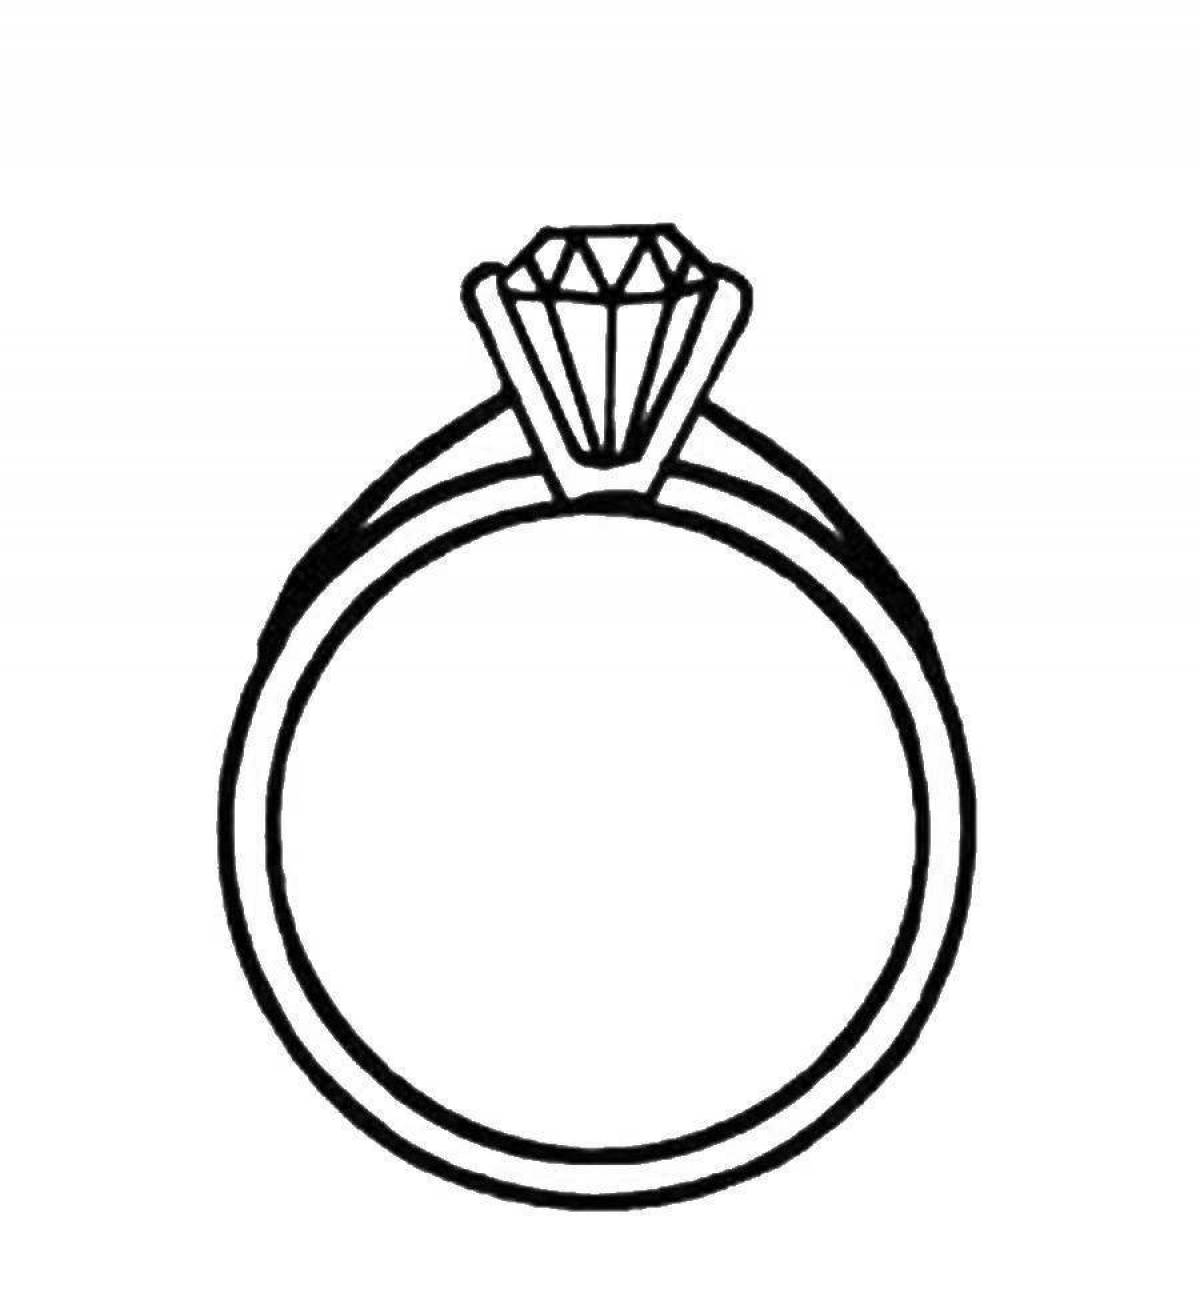 Brilliant stone ring coloring page